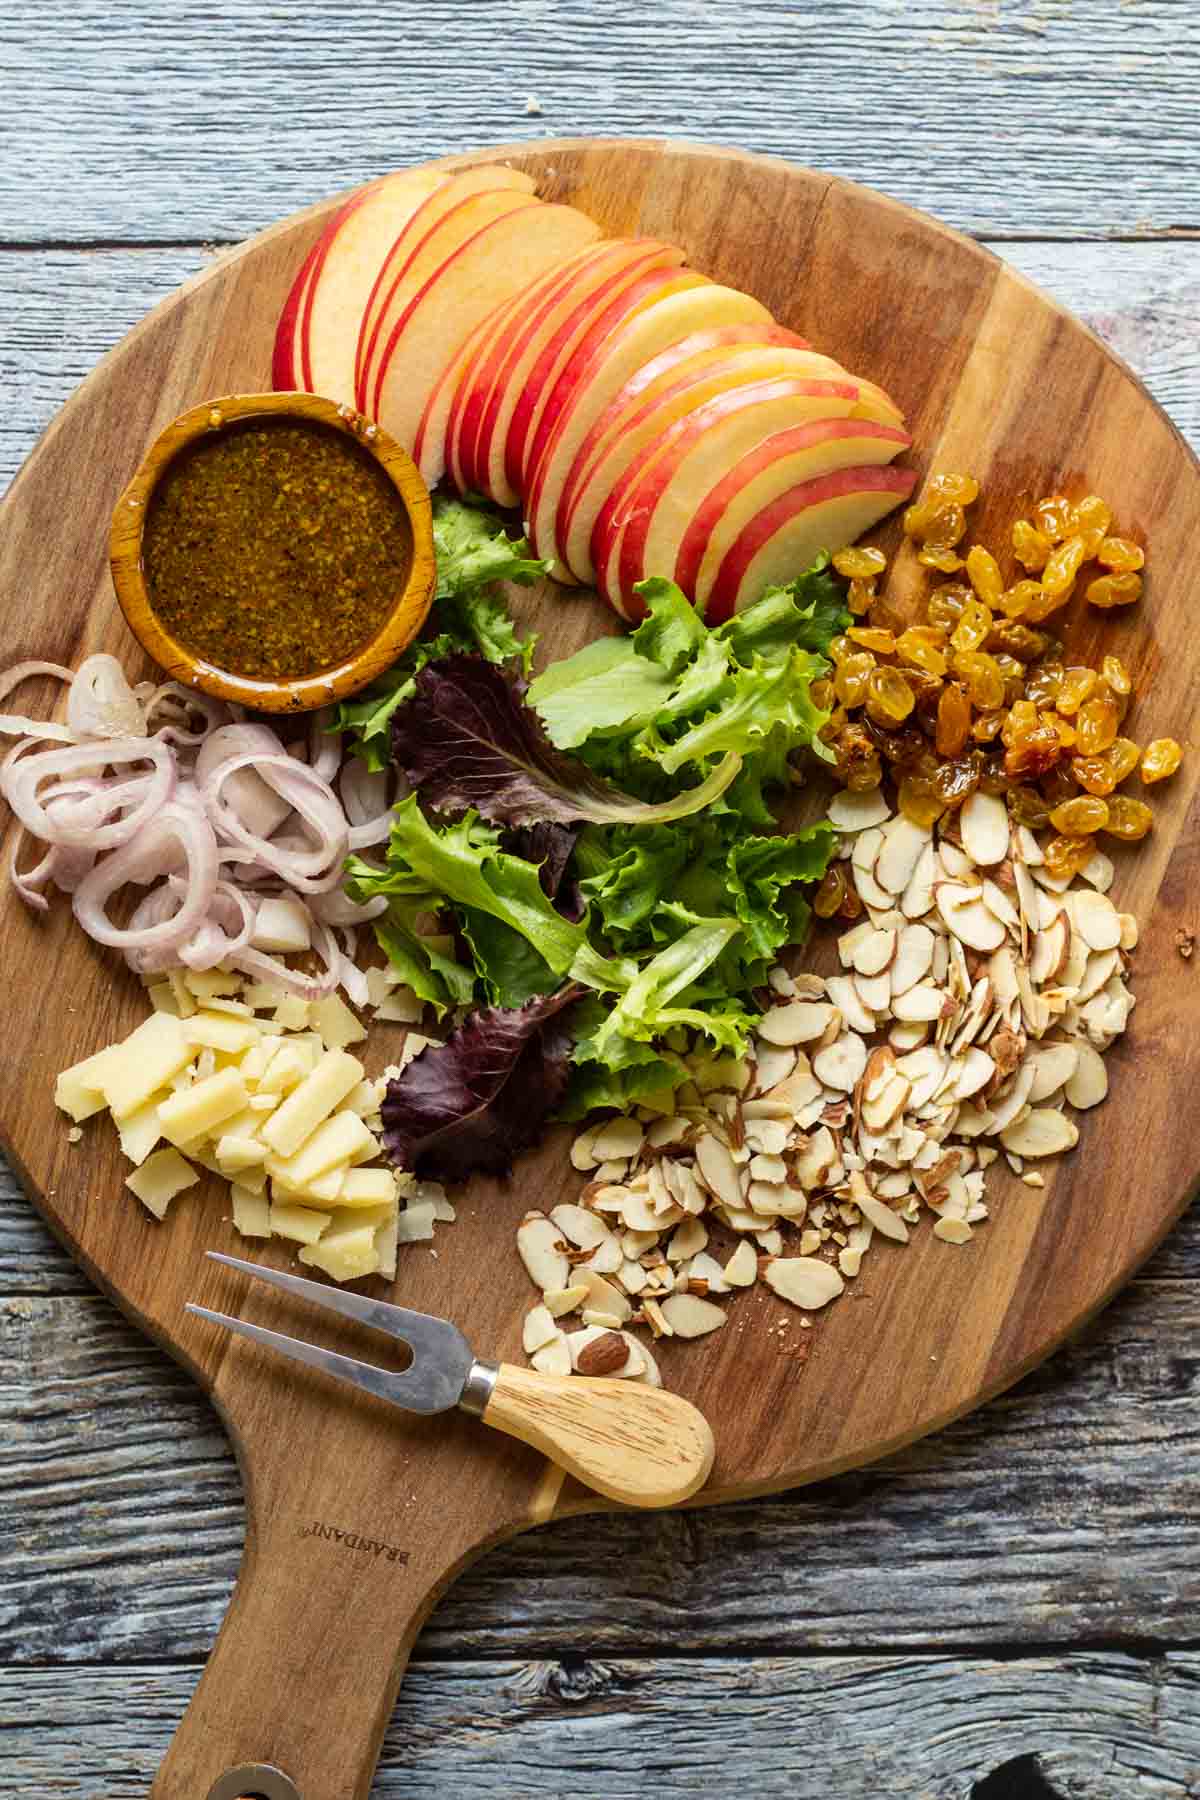 Sliced apples, mixed green salad, nuts, and cheese on a wooden board